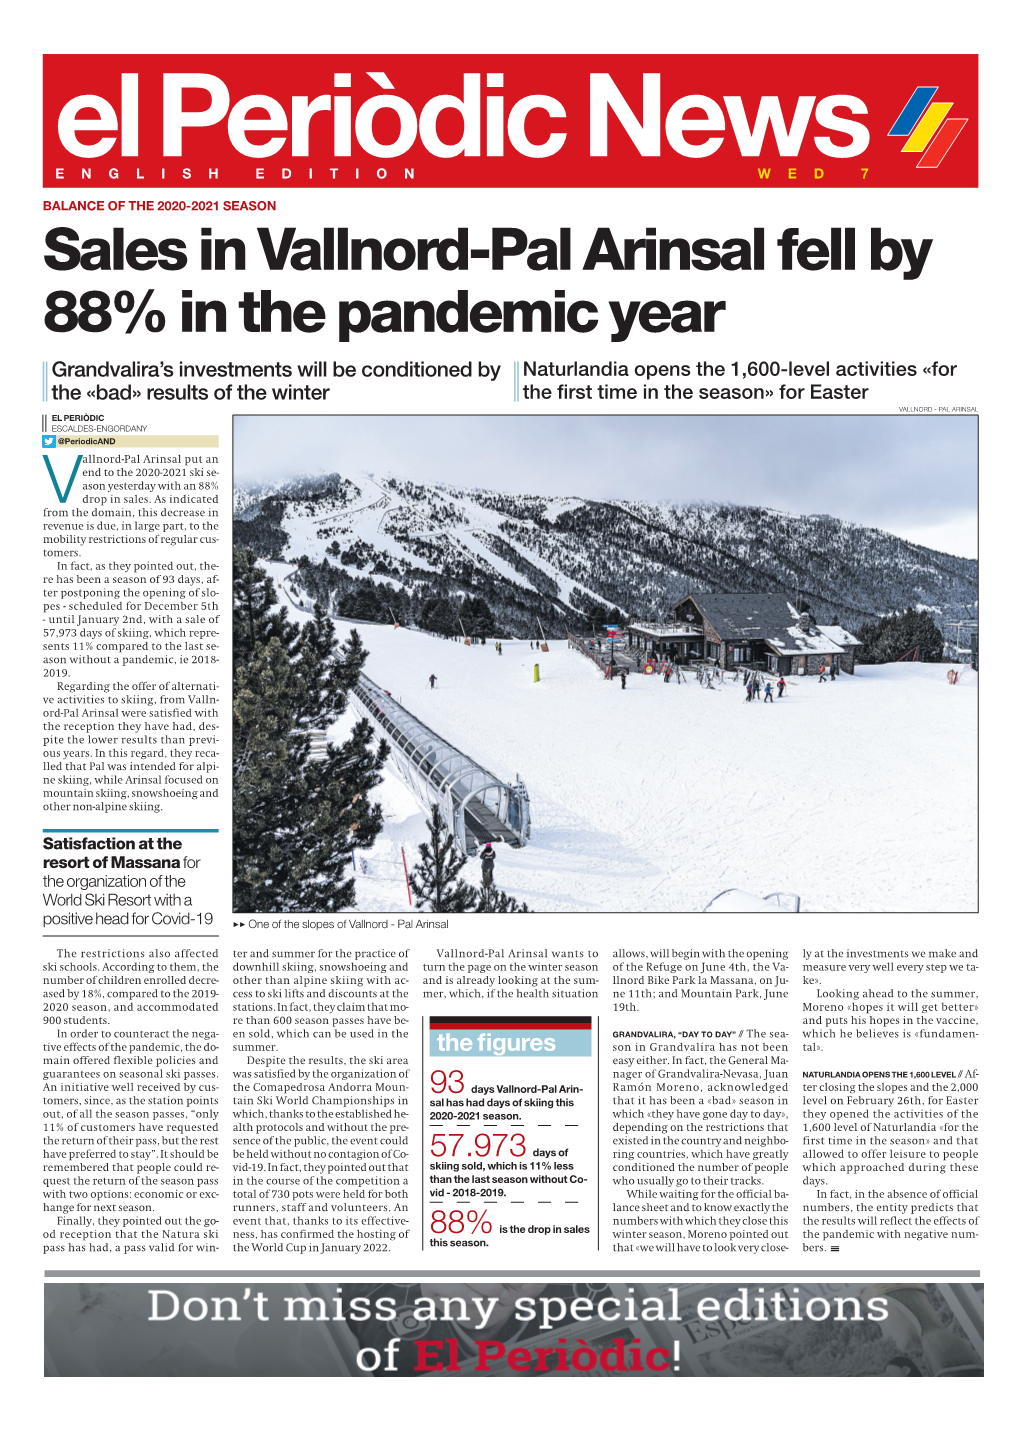 Sales in Vallnord-Pal Arinsal Fell by 88% in the Pandemic Year